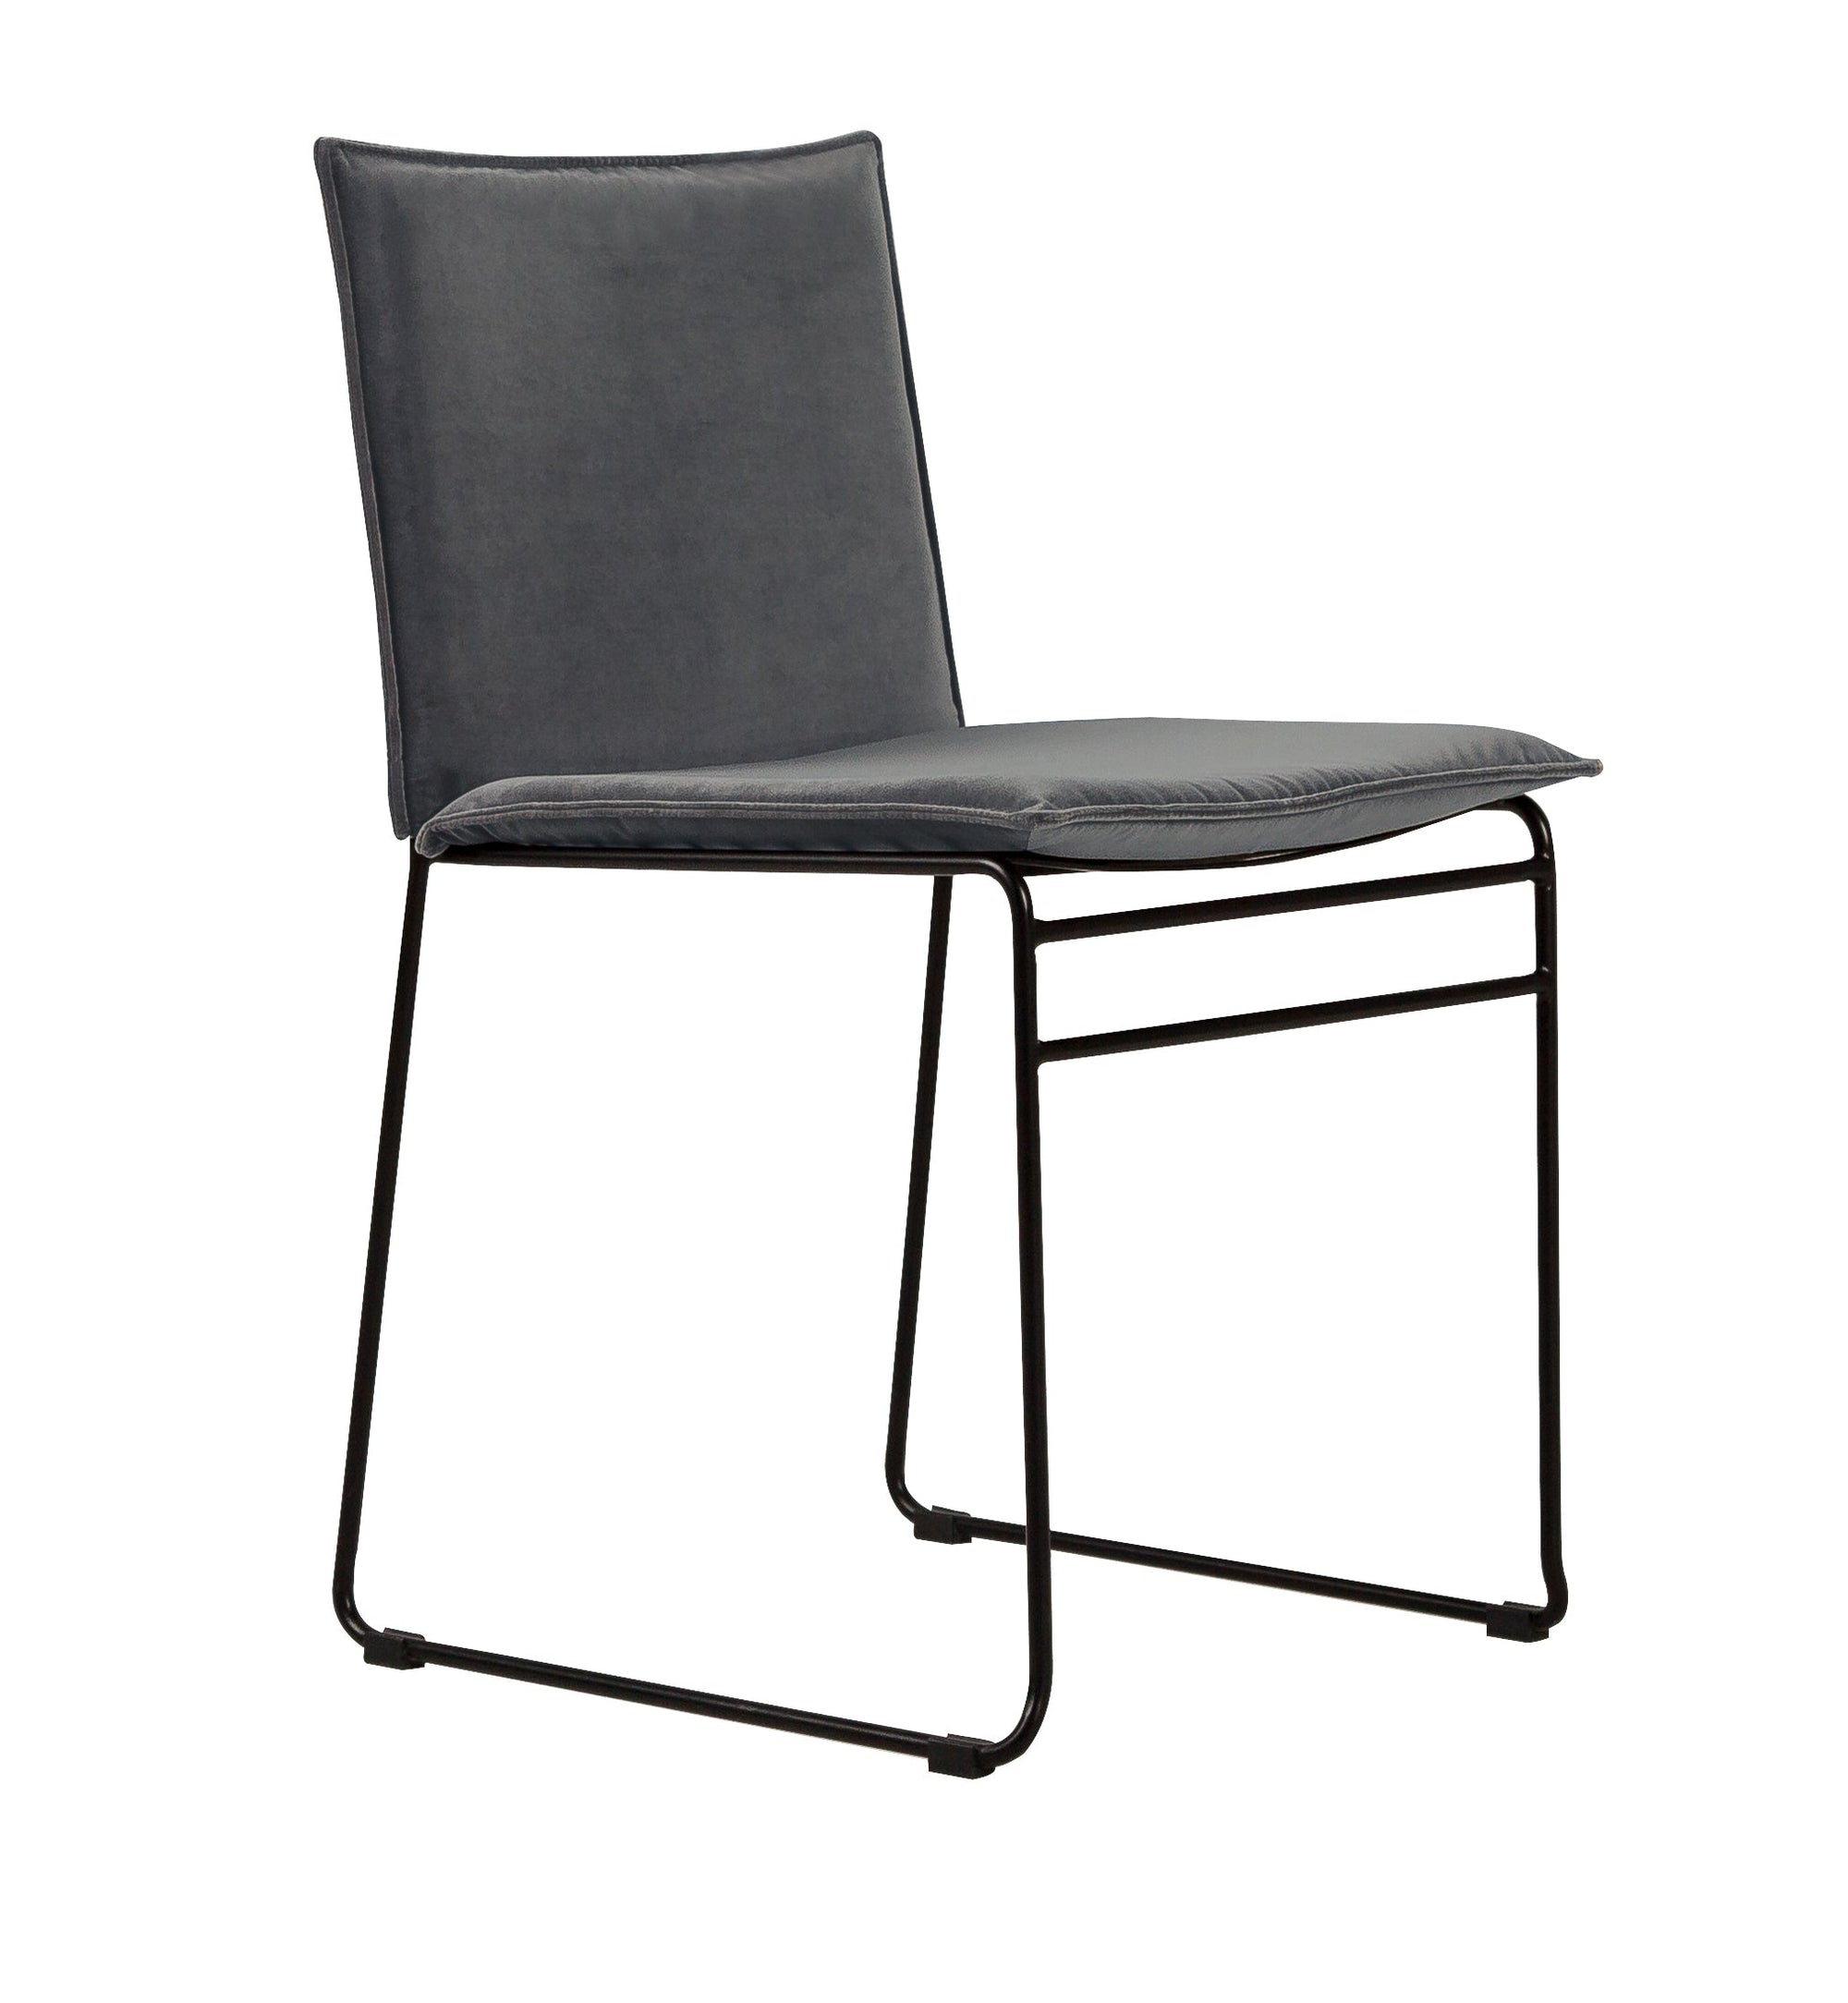 KYST DINING CHAIR